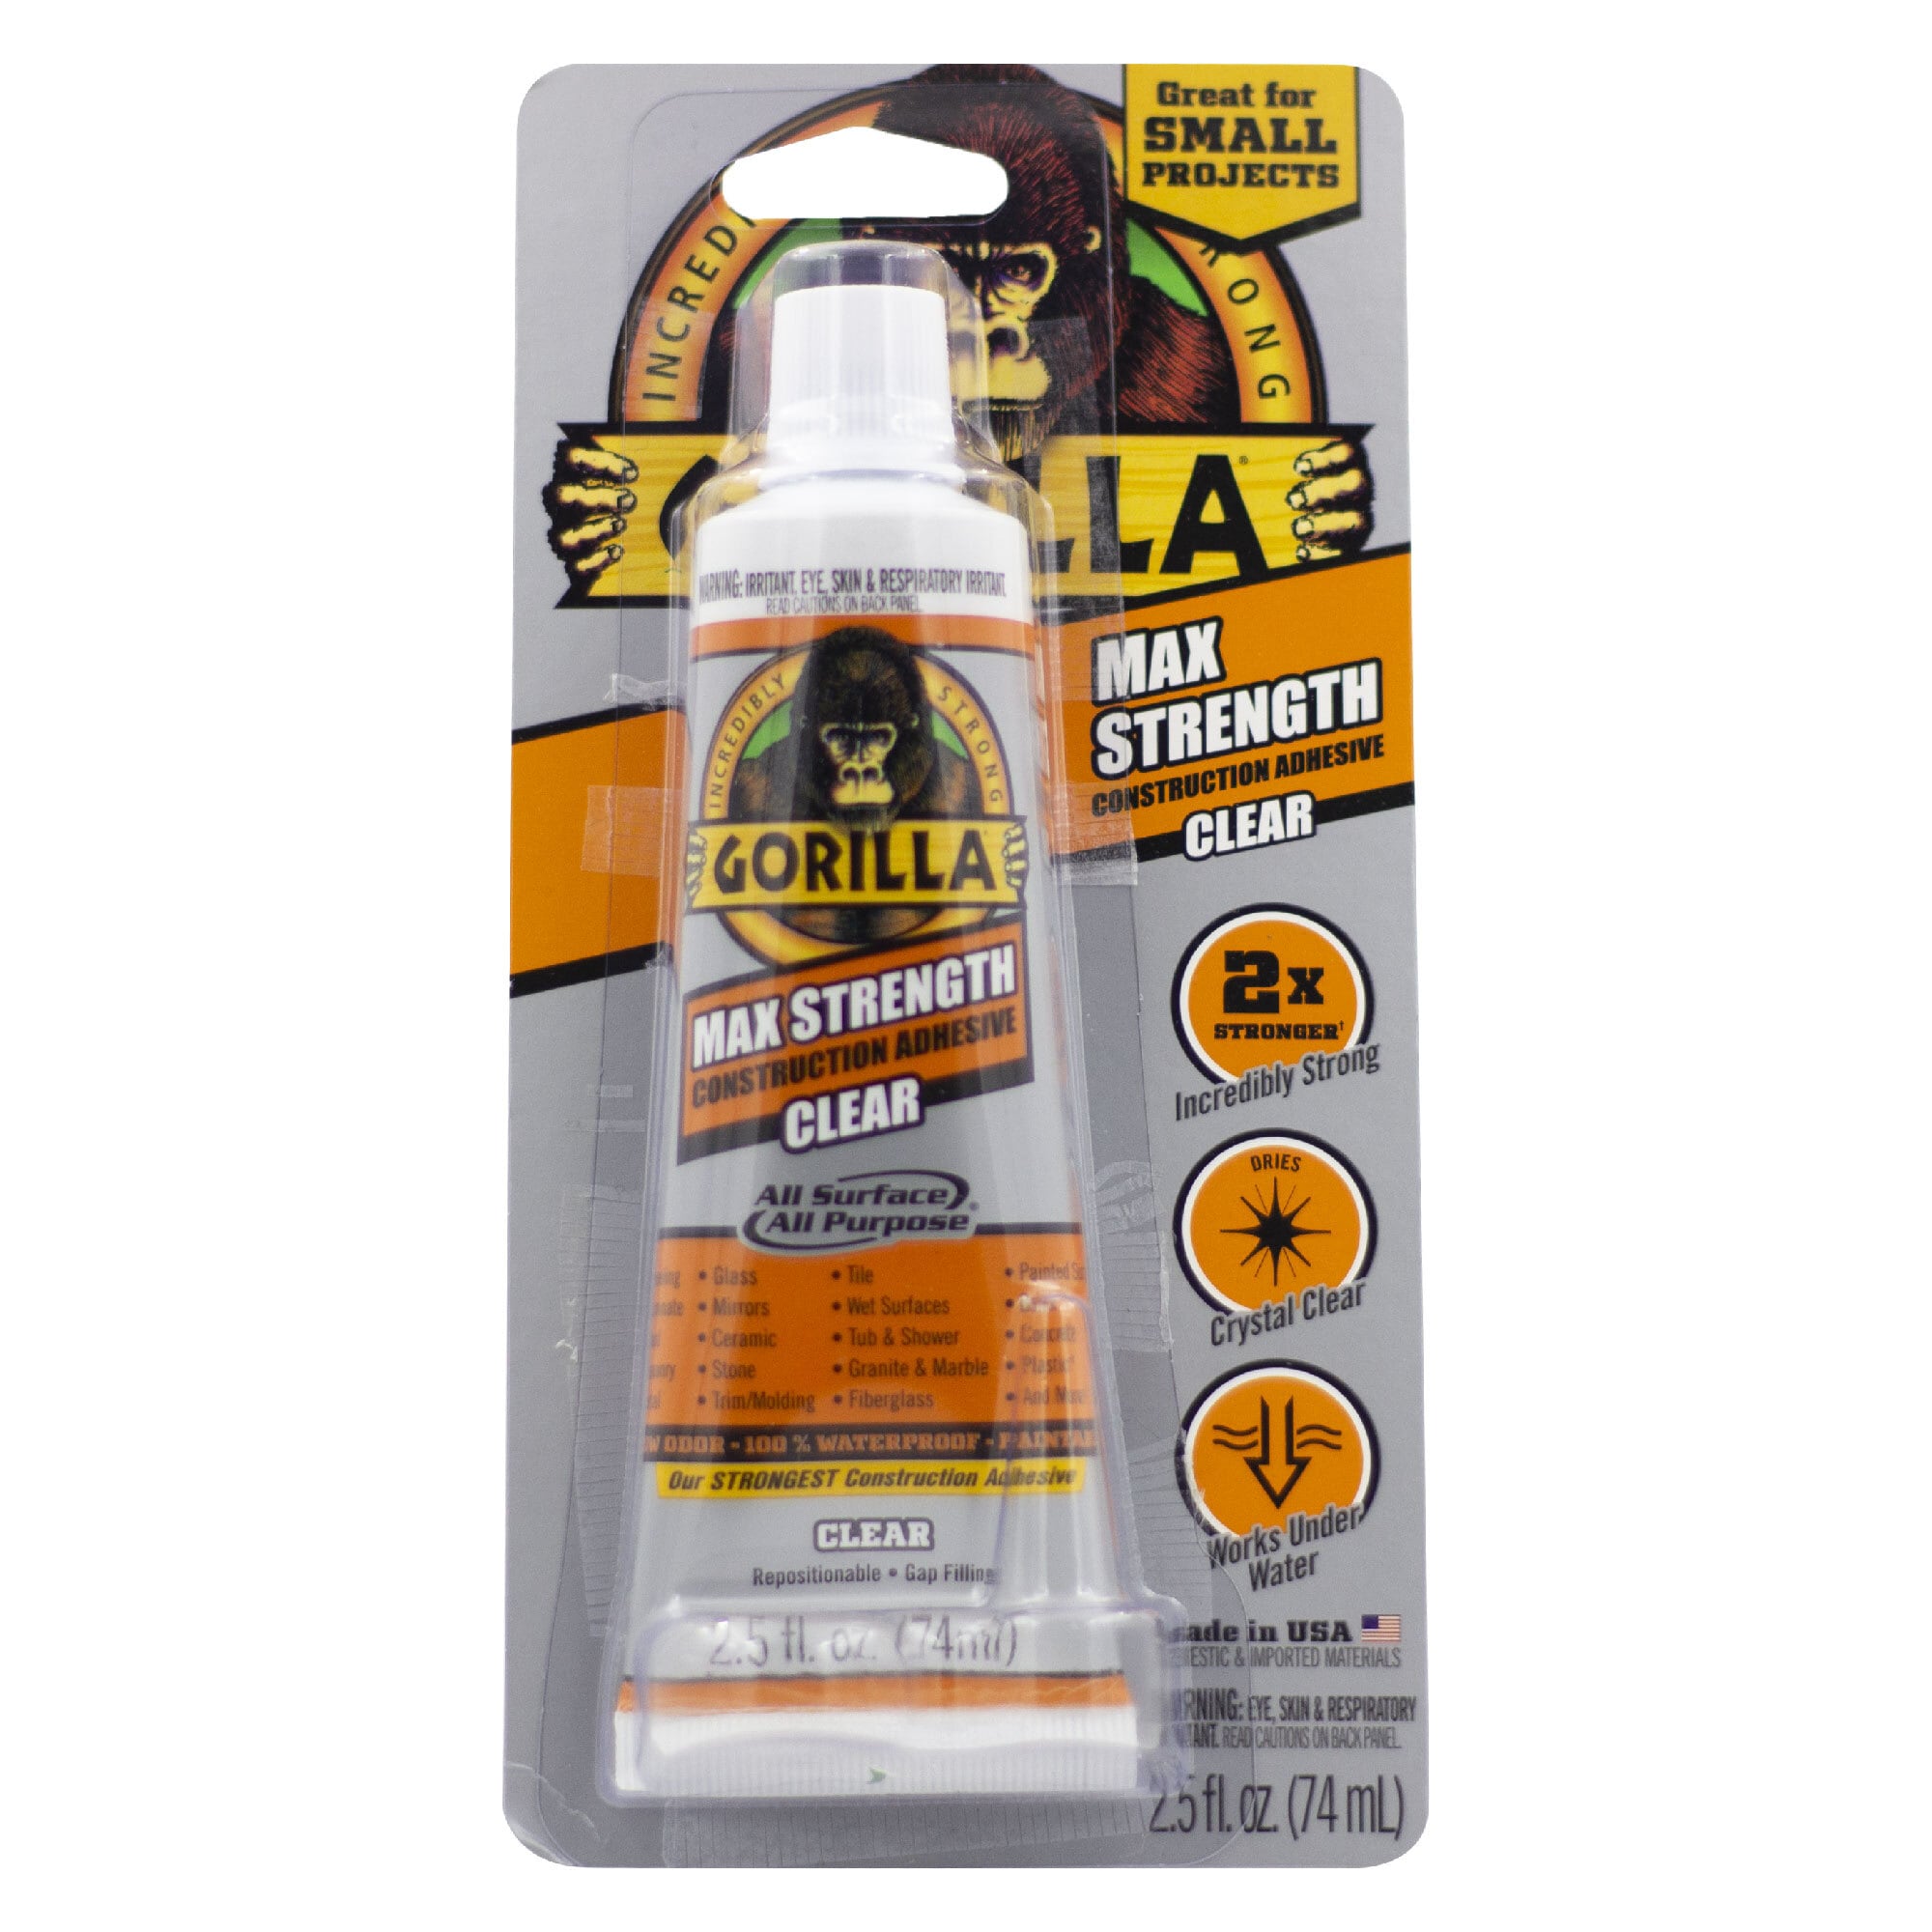 Gorilla Max Strength Clear Polymer-based Exterior Construction